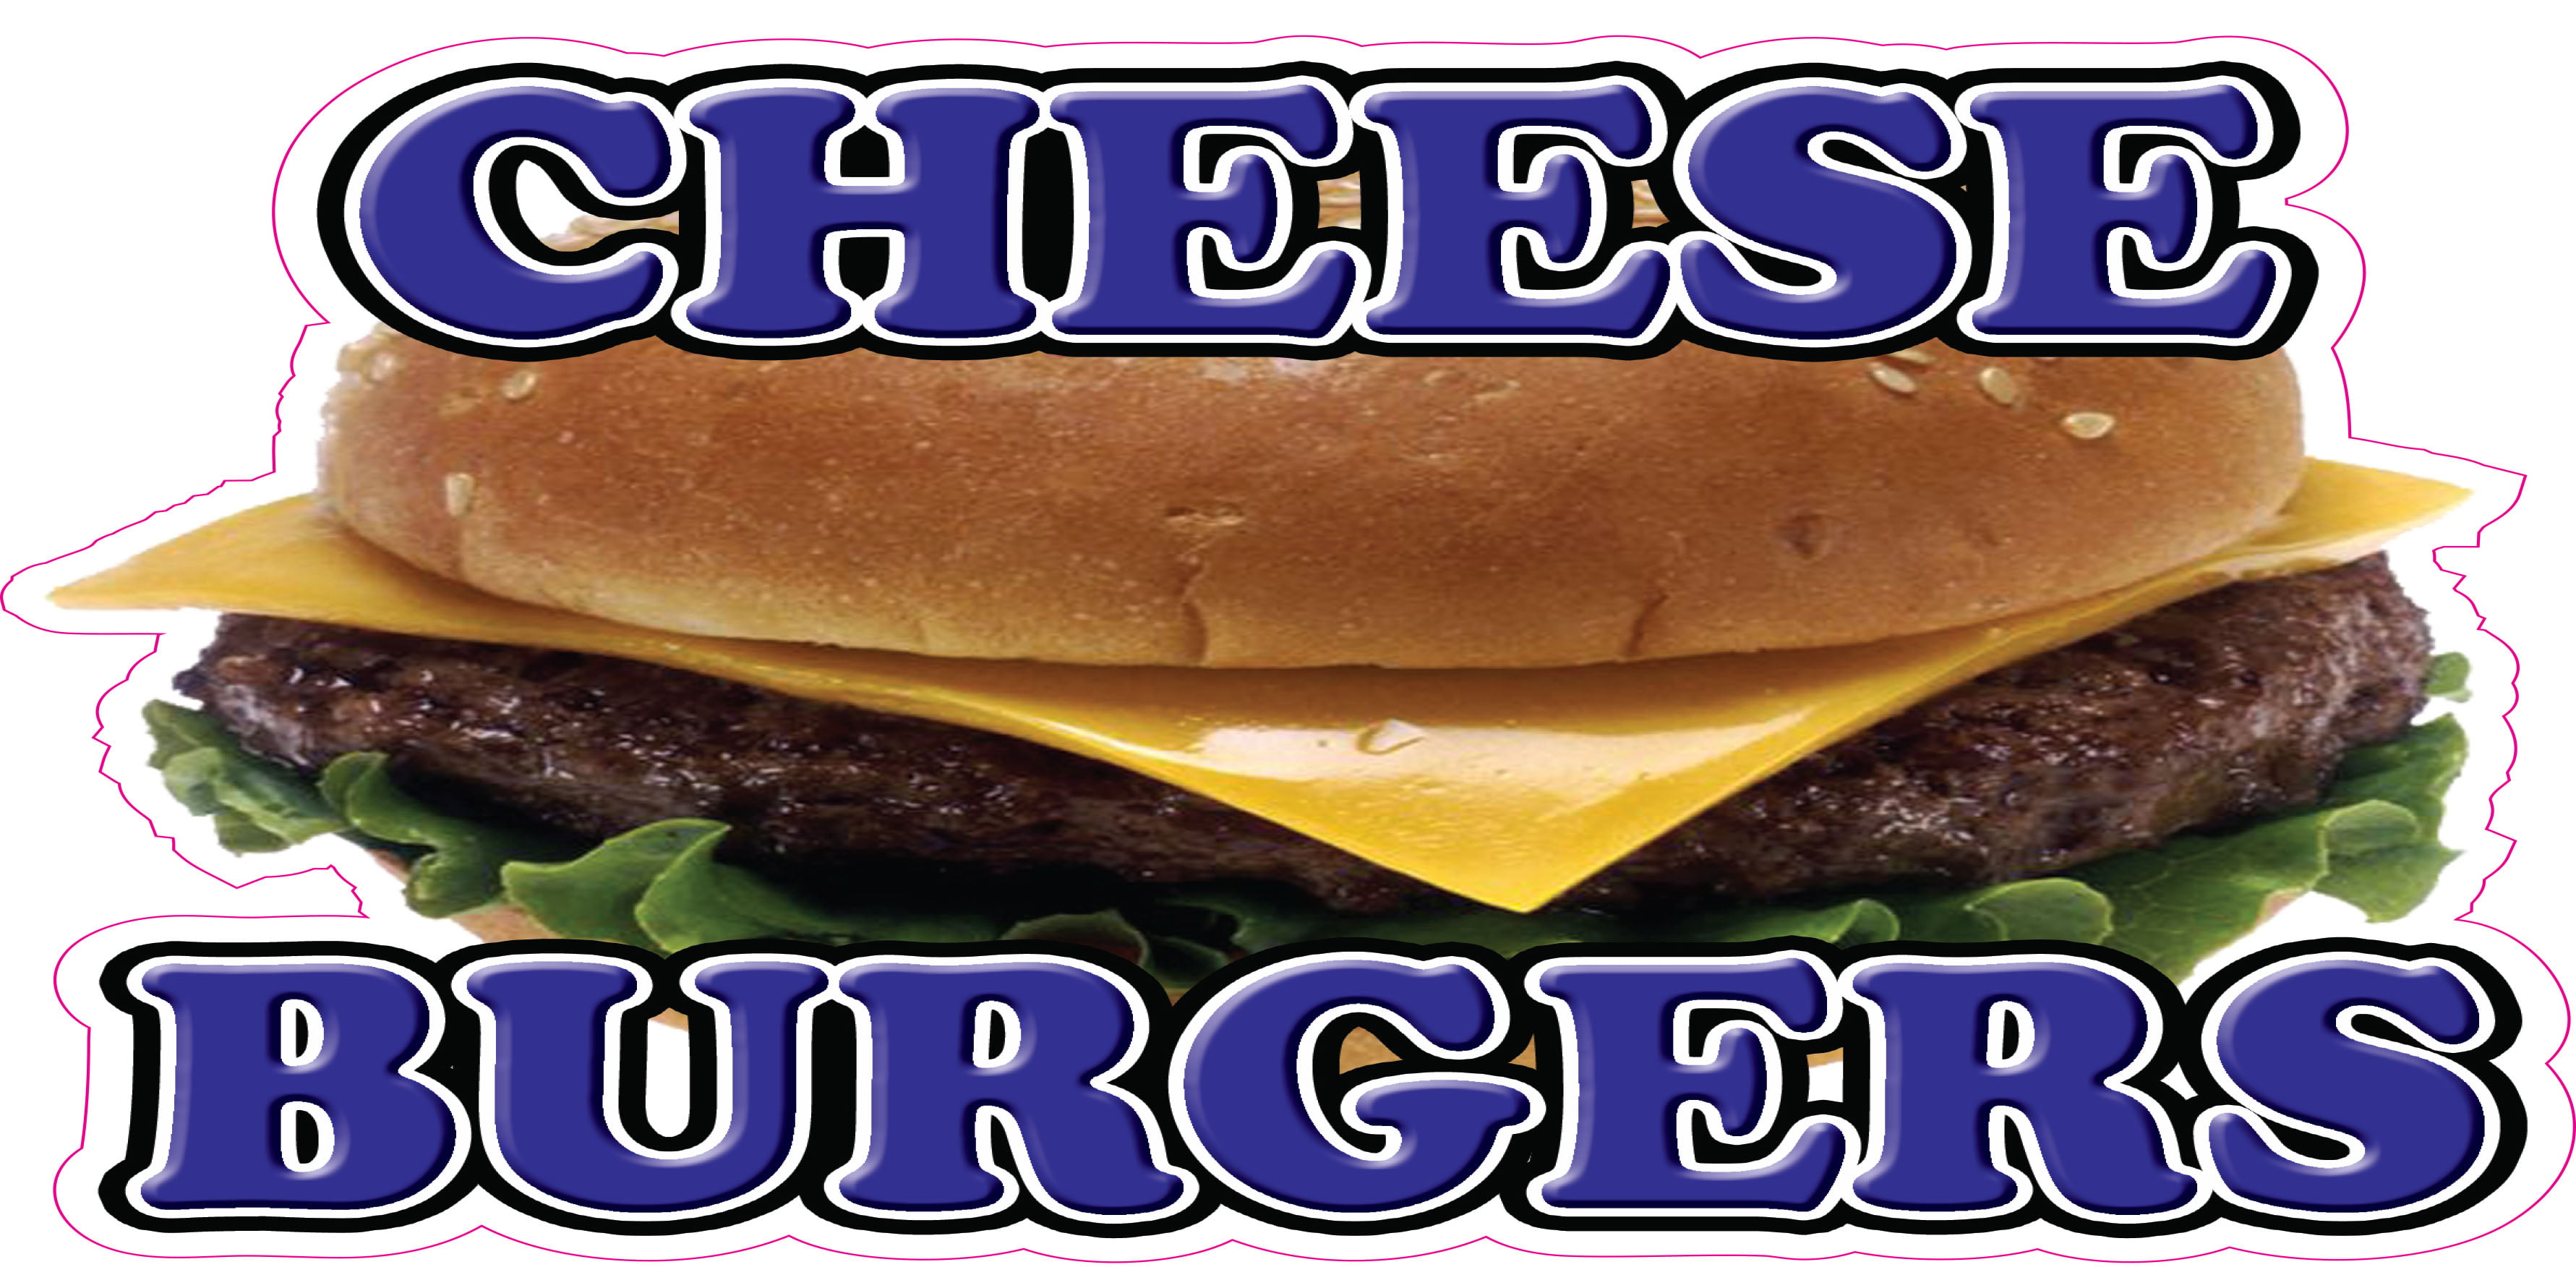 Burgers Cheeseburger Delux Cheese Concession Food Truck Vinyl Sticker Menu Decal 